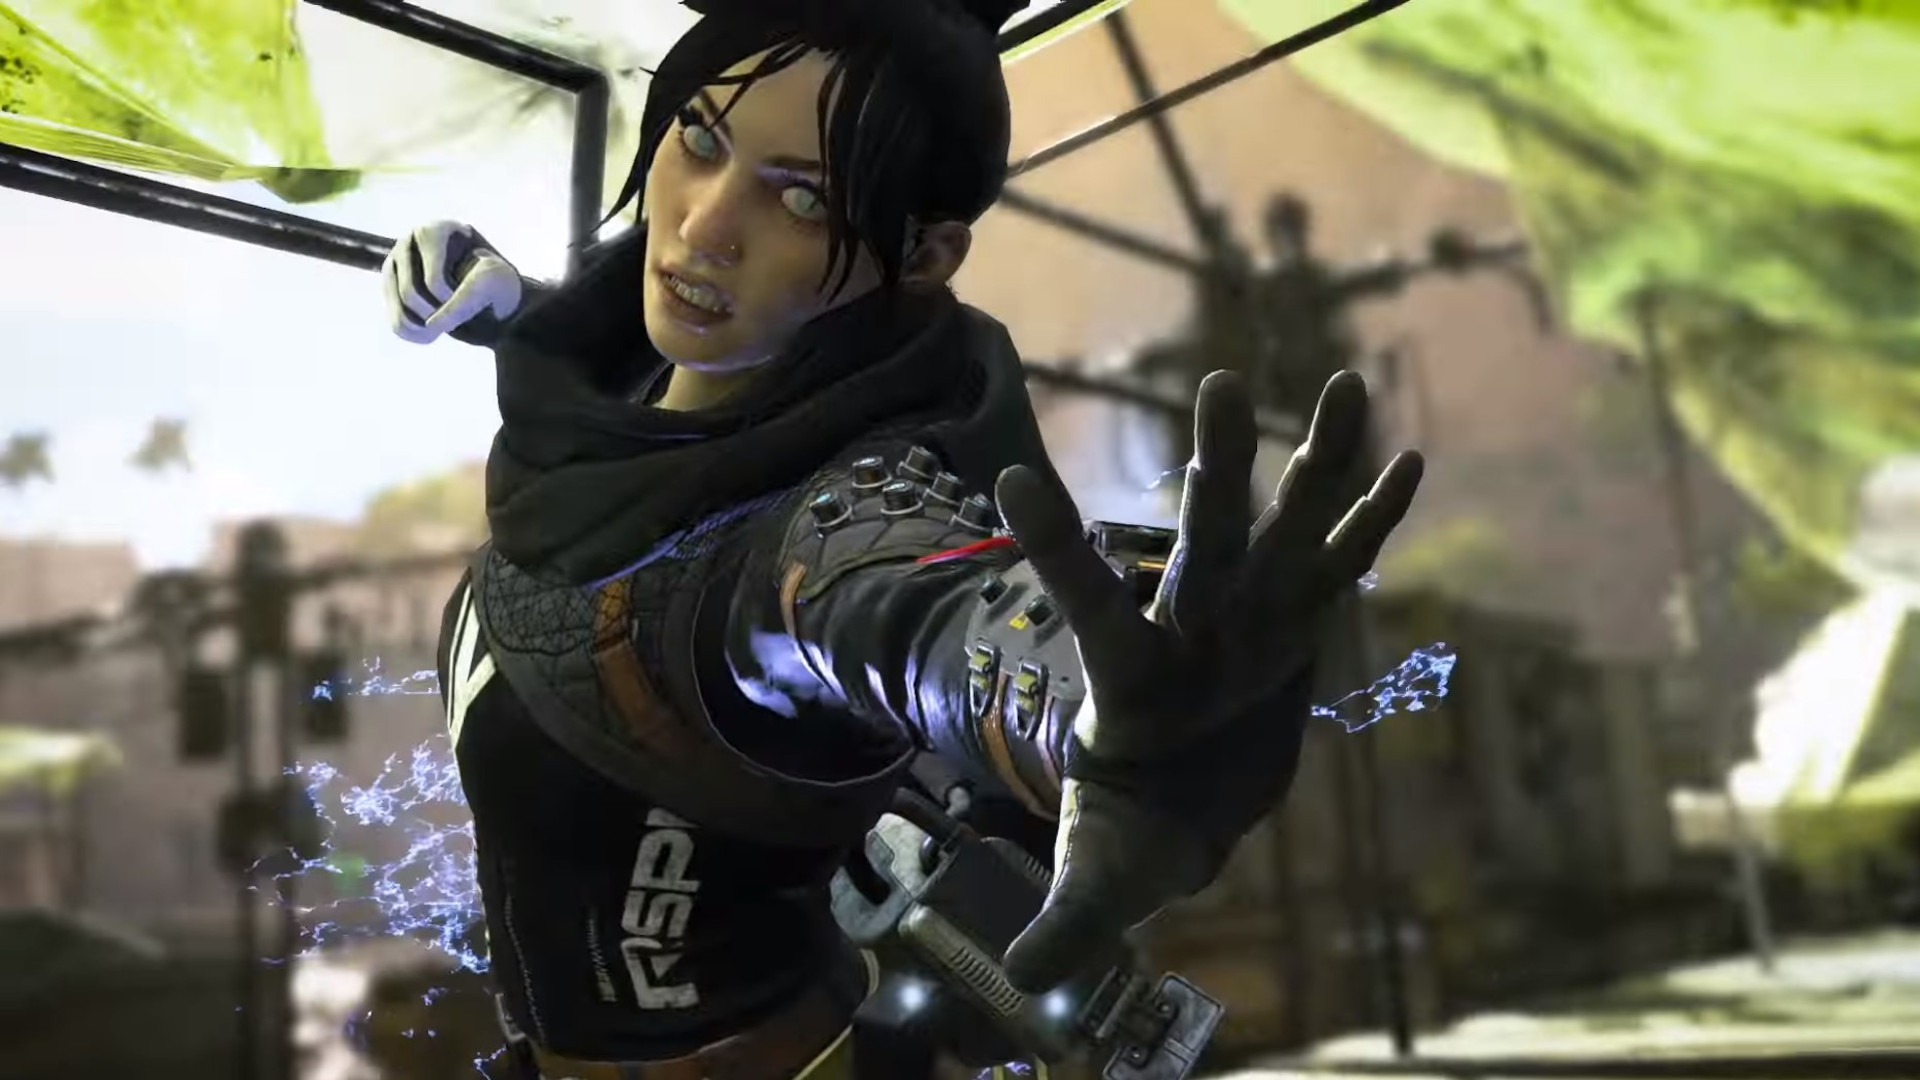 PornHub Stats Show People Have Got The Hots For Apex Legends Wraith